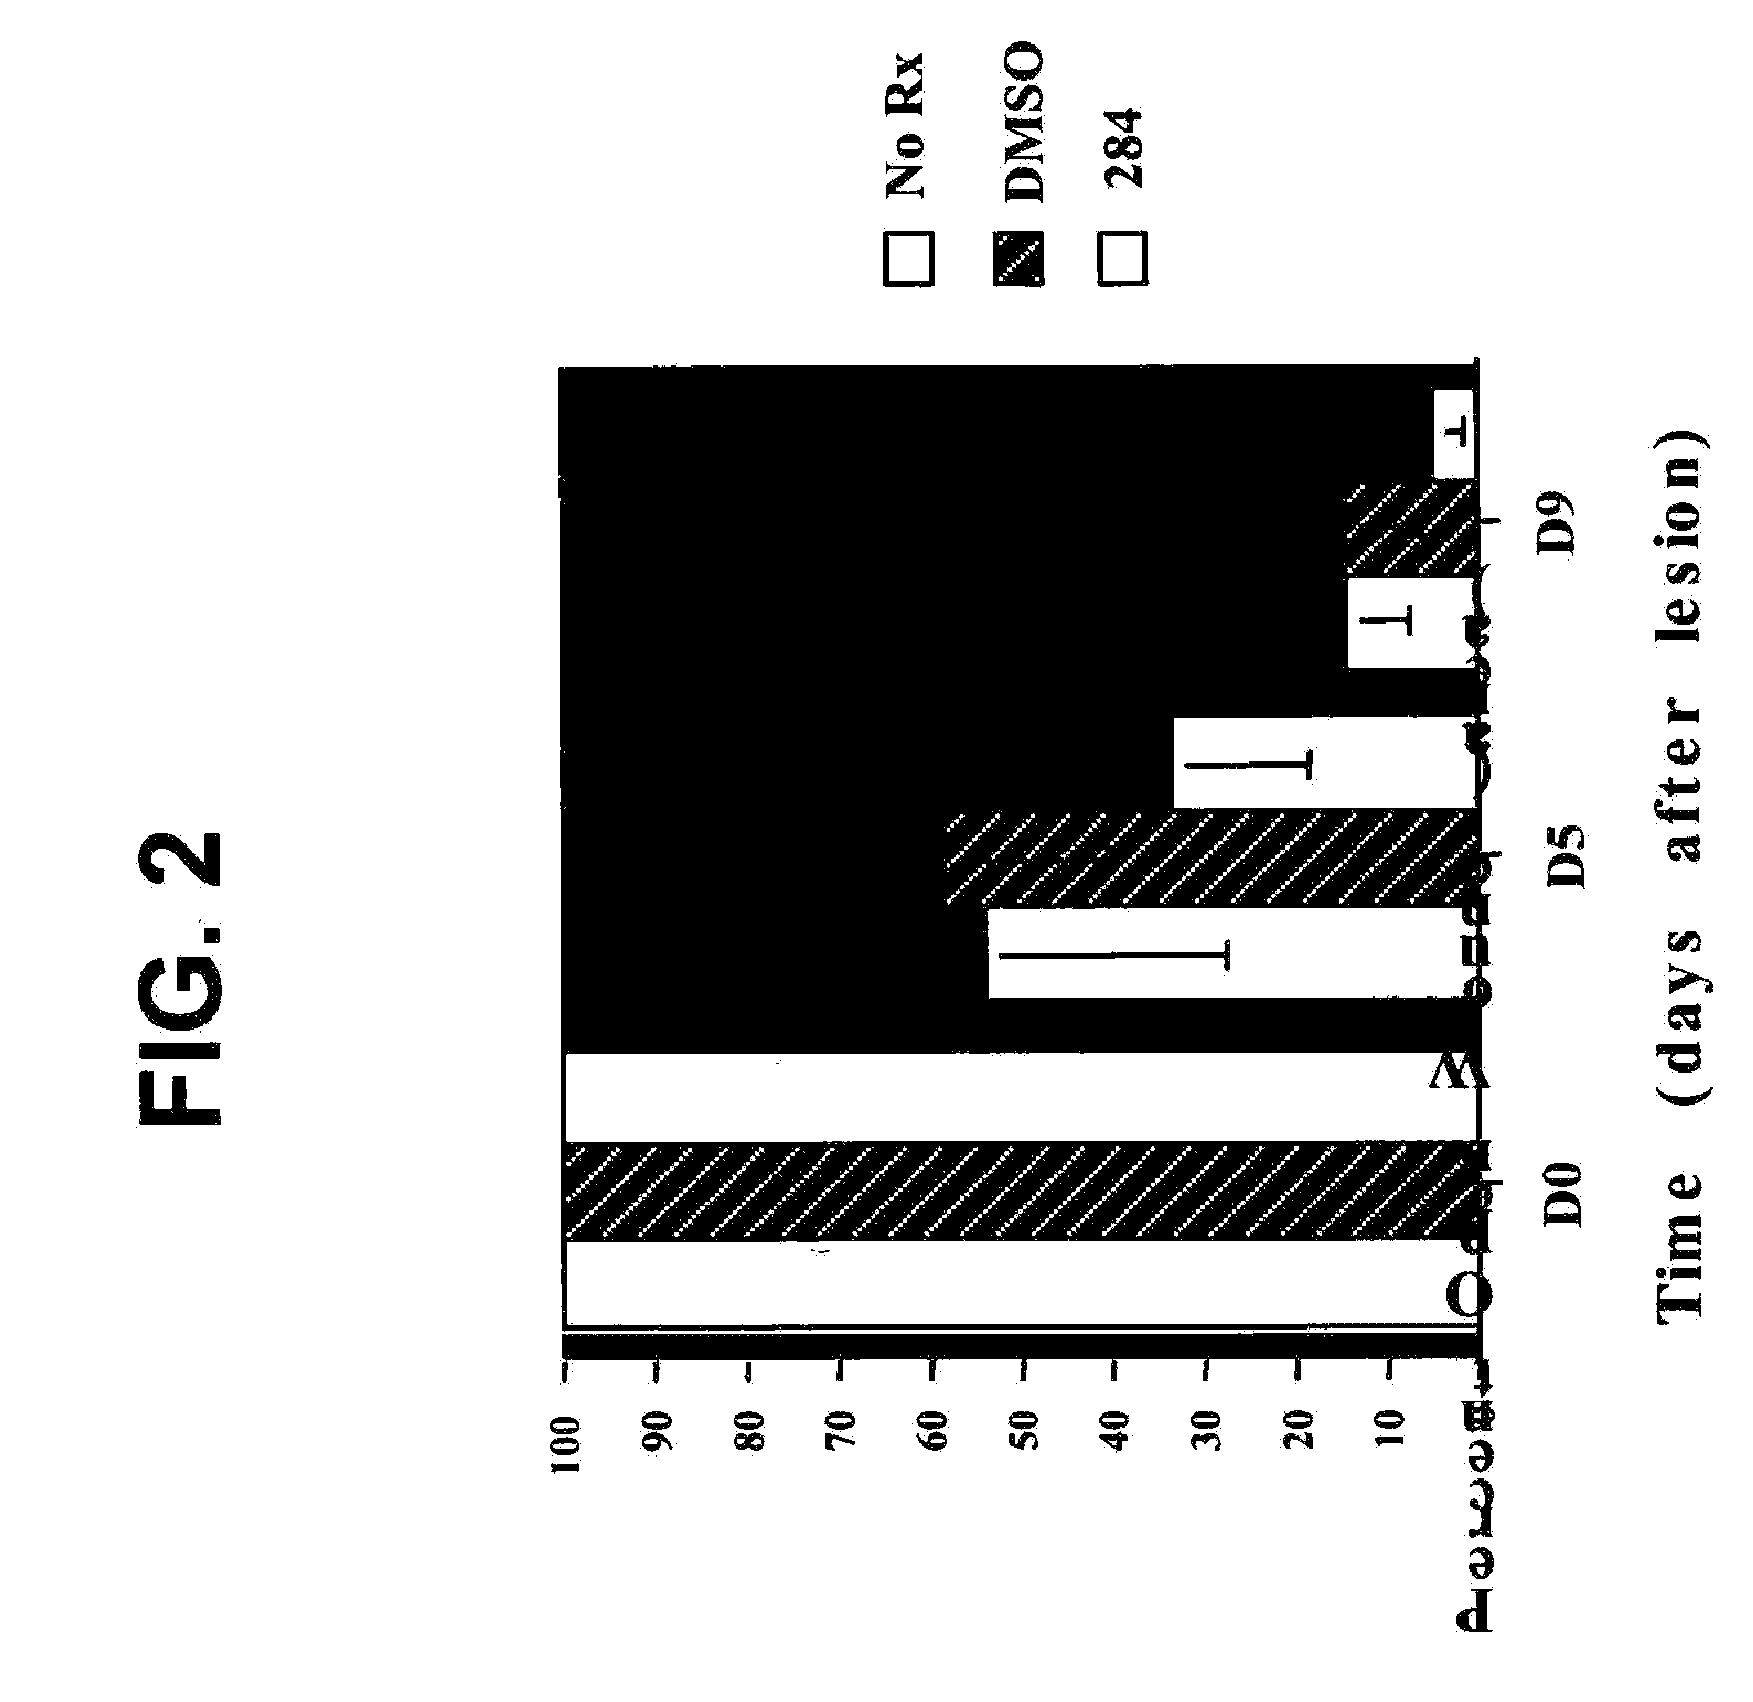 Method for modulating gene expression in epithelial cells